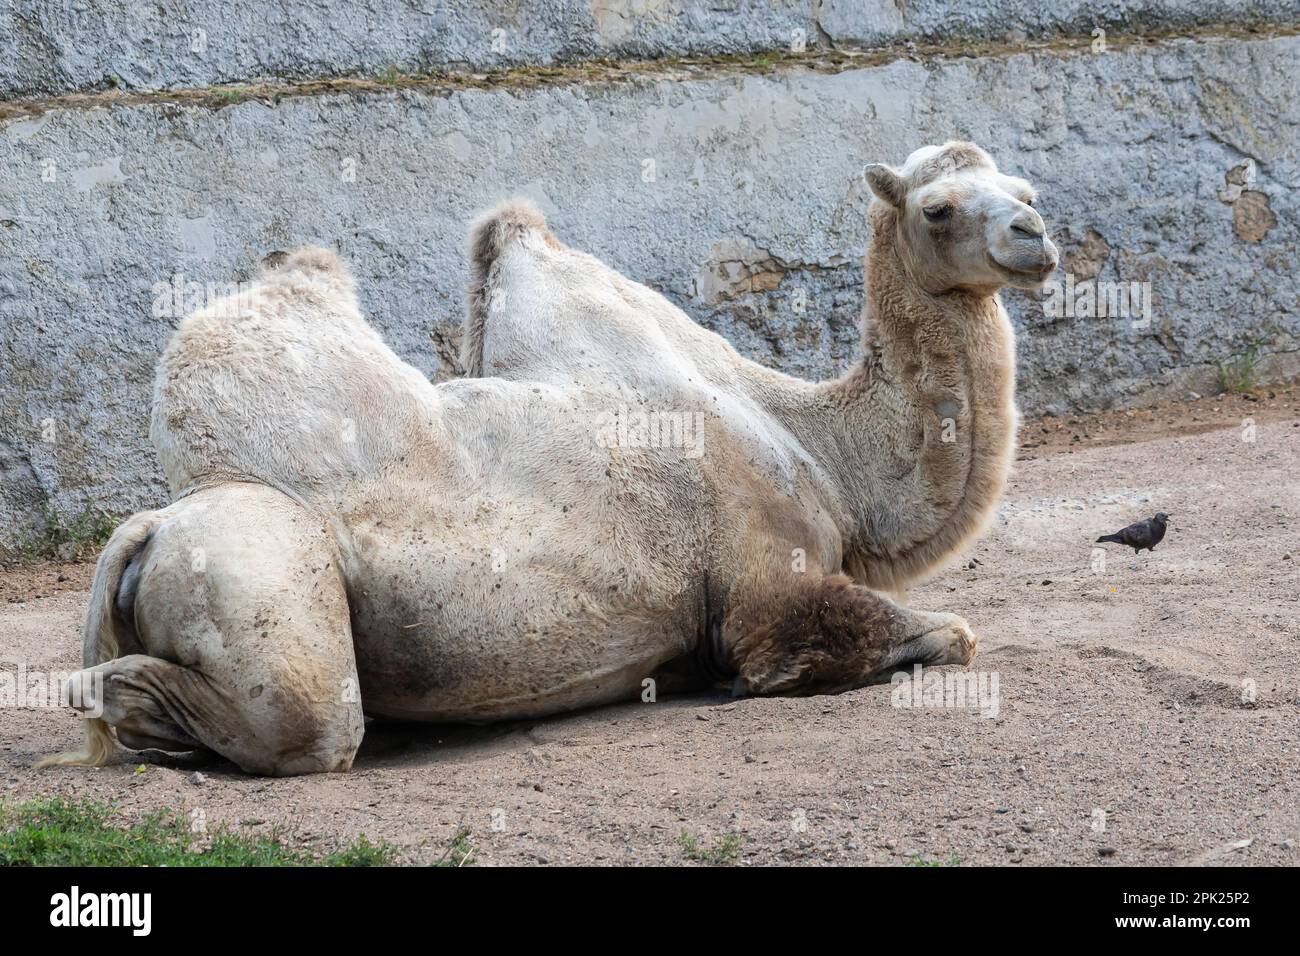 A camel in the Siberian zoo. Camel's head close-up. Long camel hair. Camels are large animals adapted to live in arid regions of the world. Stock Photo